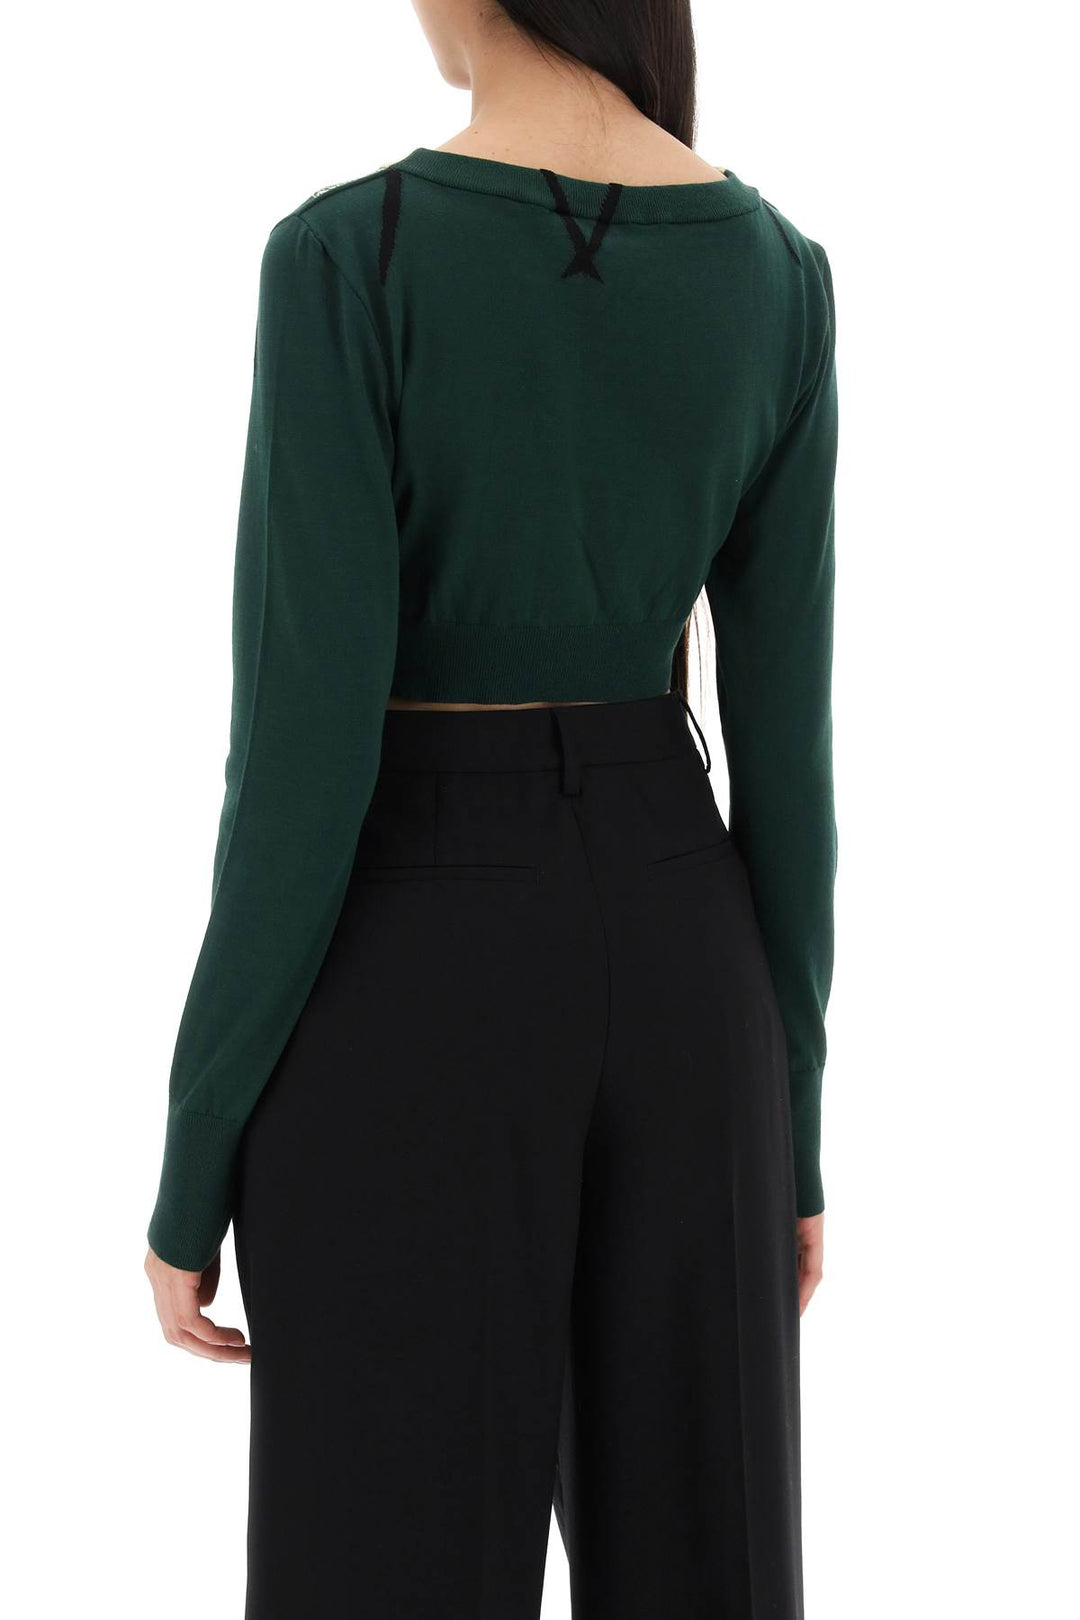 Burberry Cropped Diamond Pattern Pullover   Verde